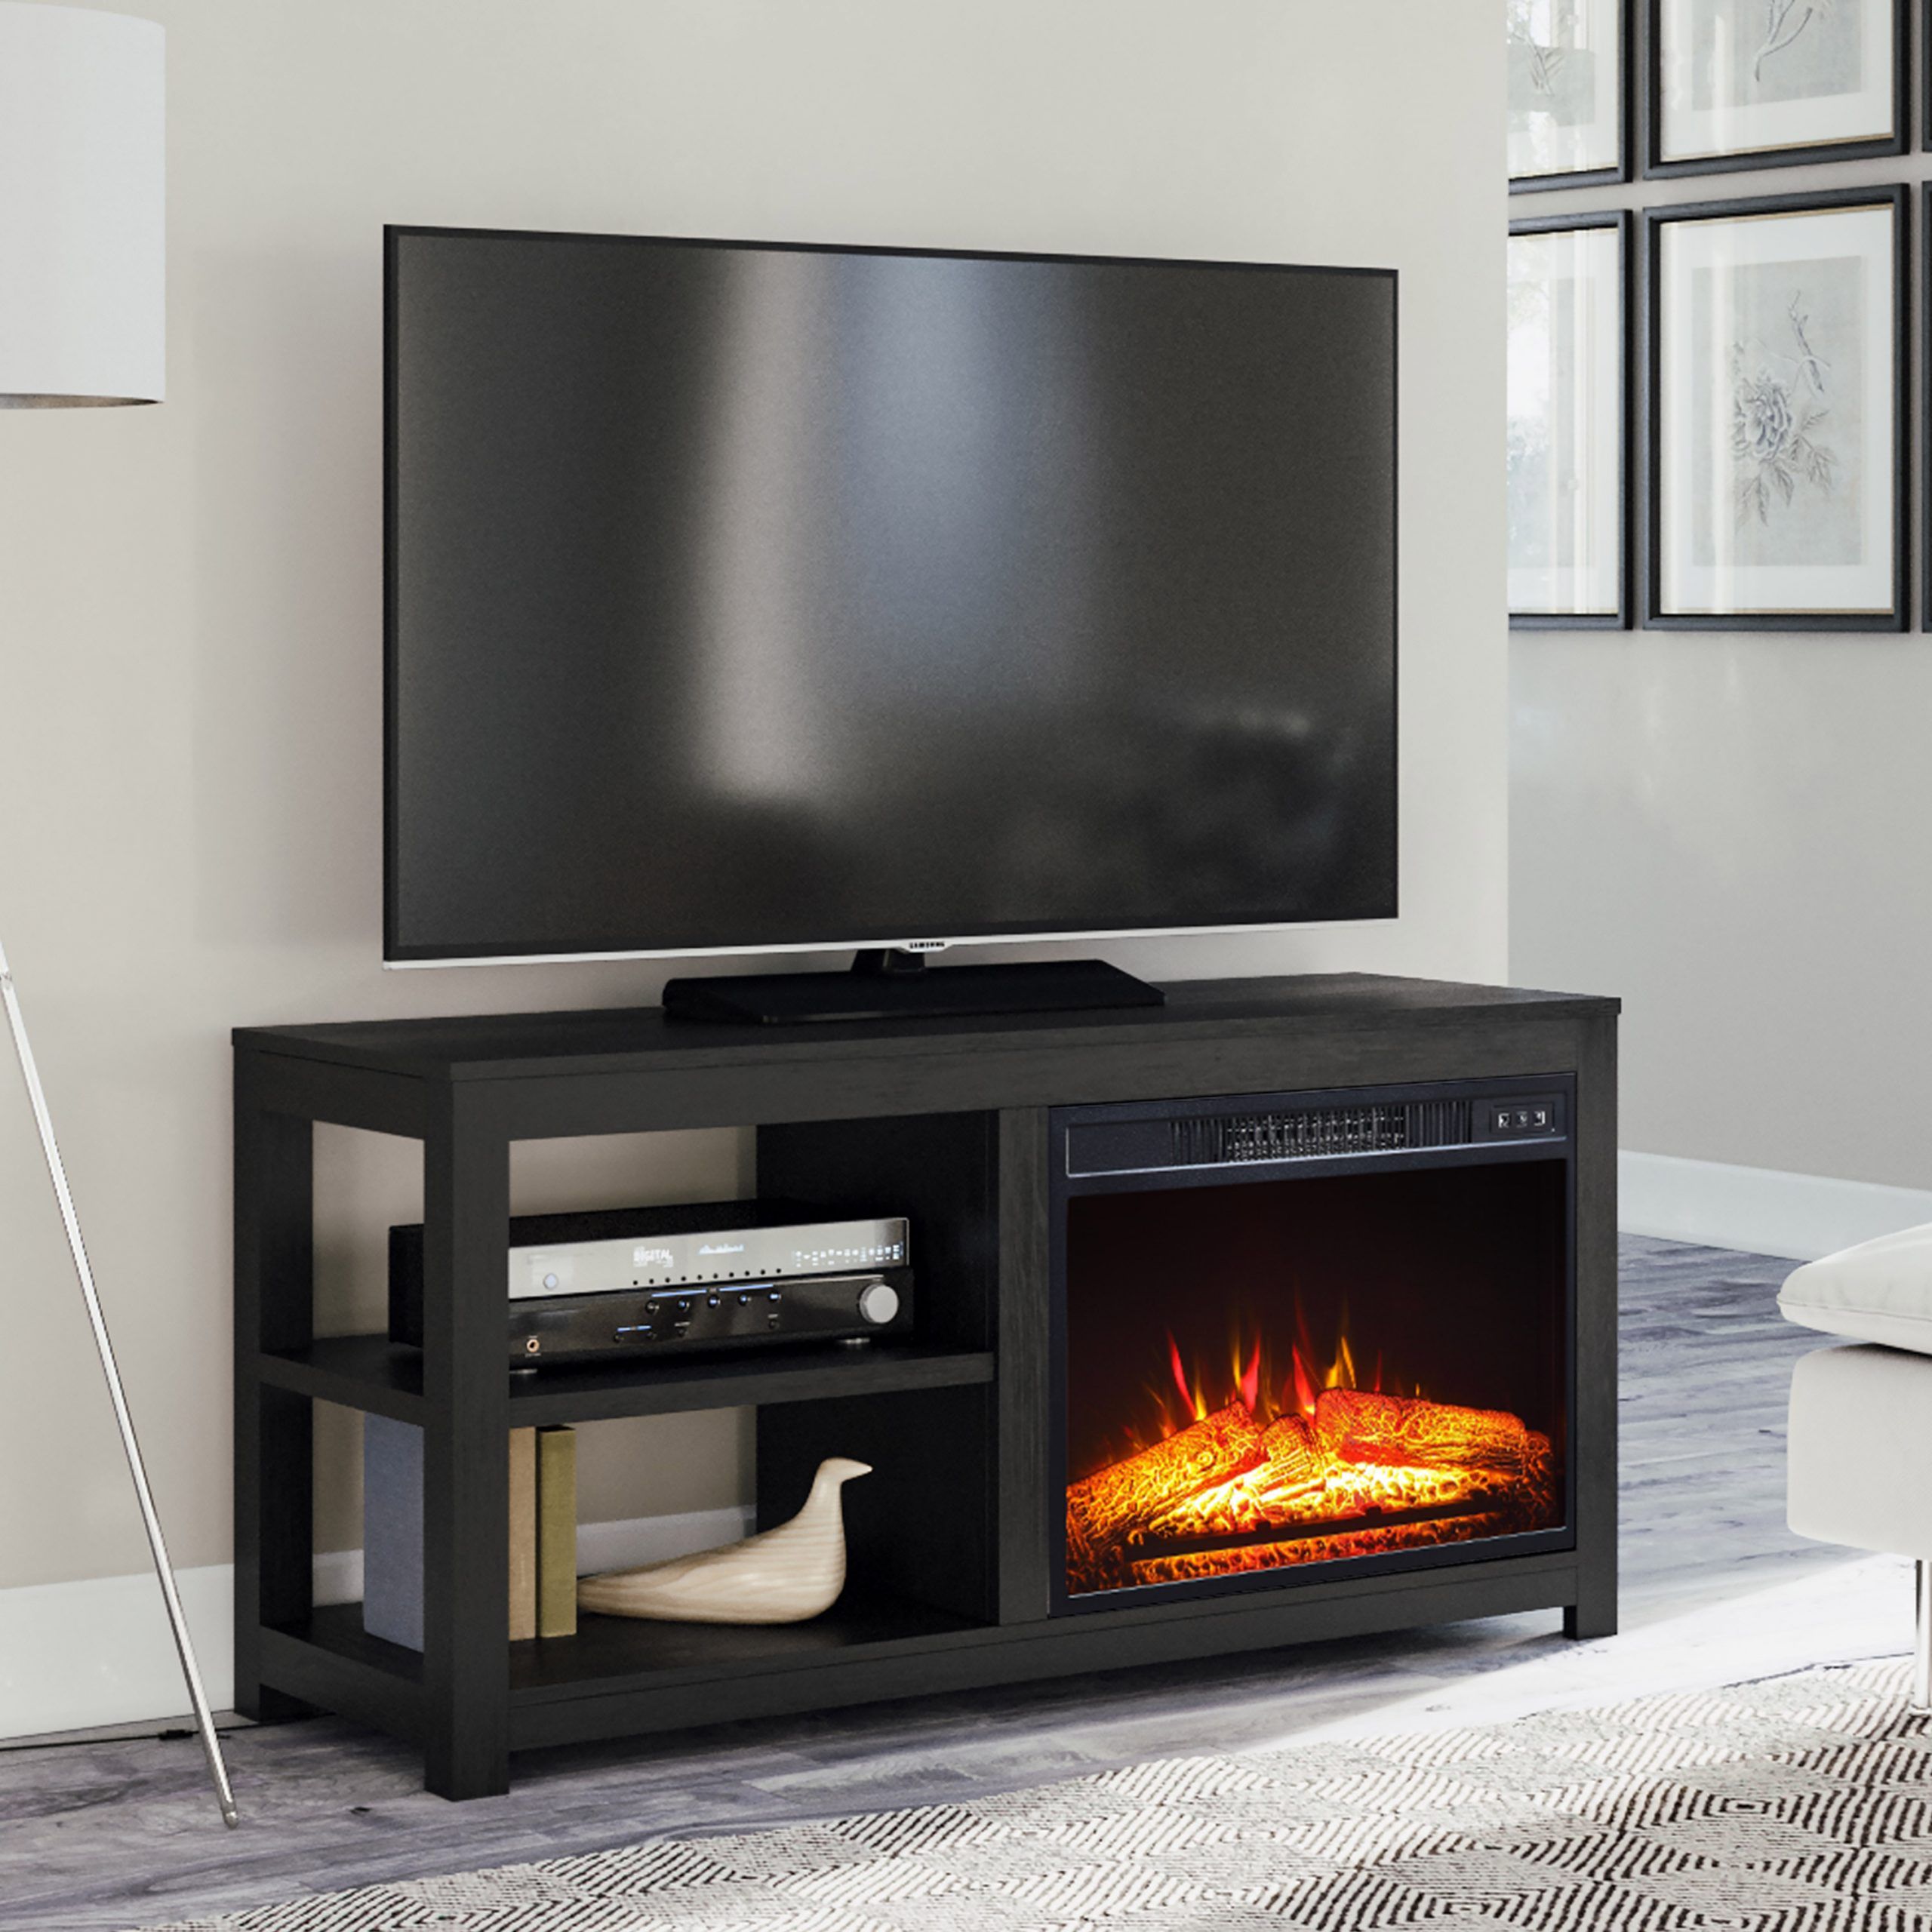 Mainstays 2 Shelf Media Fireplace Tv Stand For Flat Panel In Oak Tv Cabinets For Flat Screens (View 5 of 12)